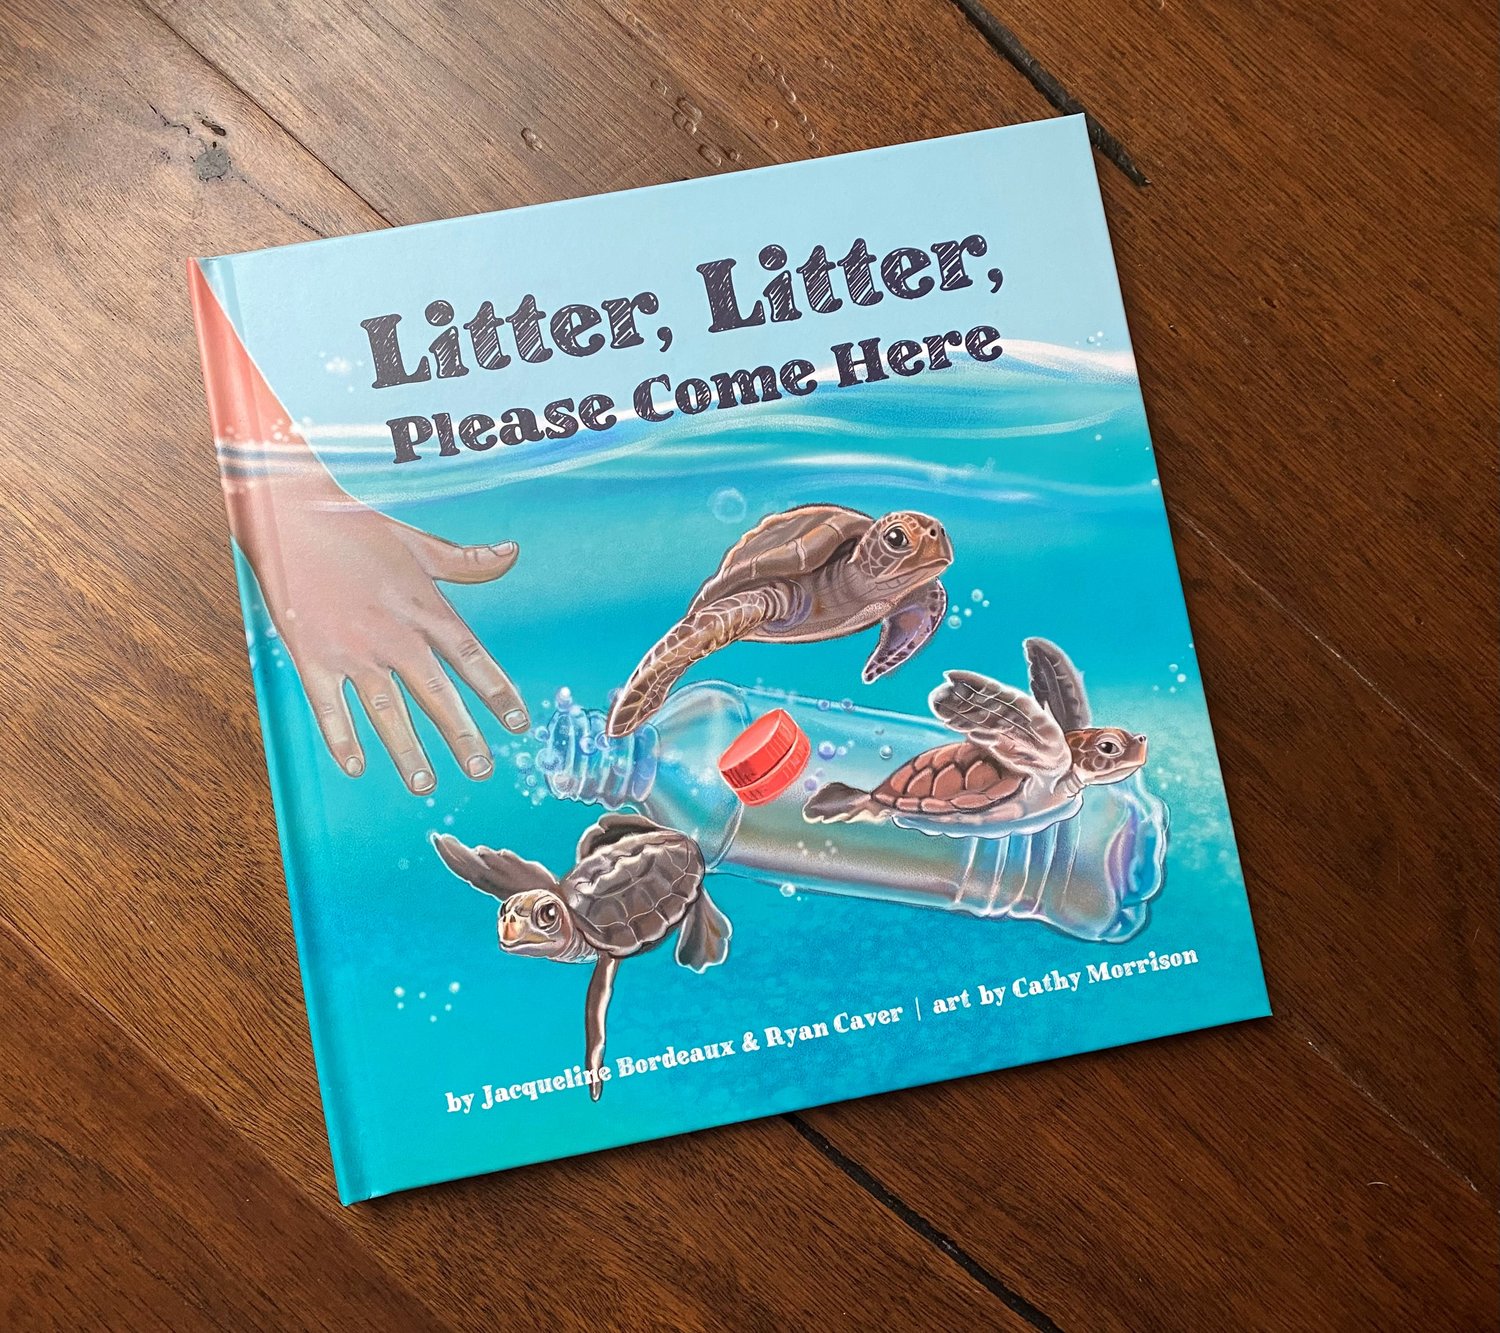 Litter, Litter, Please Come Here is a book written by Baldwin County resident Ryan Caver about his son Oliver and his love of cleaning the beach.